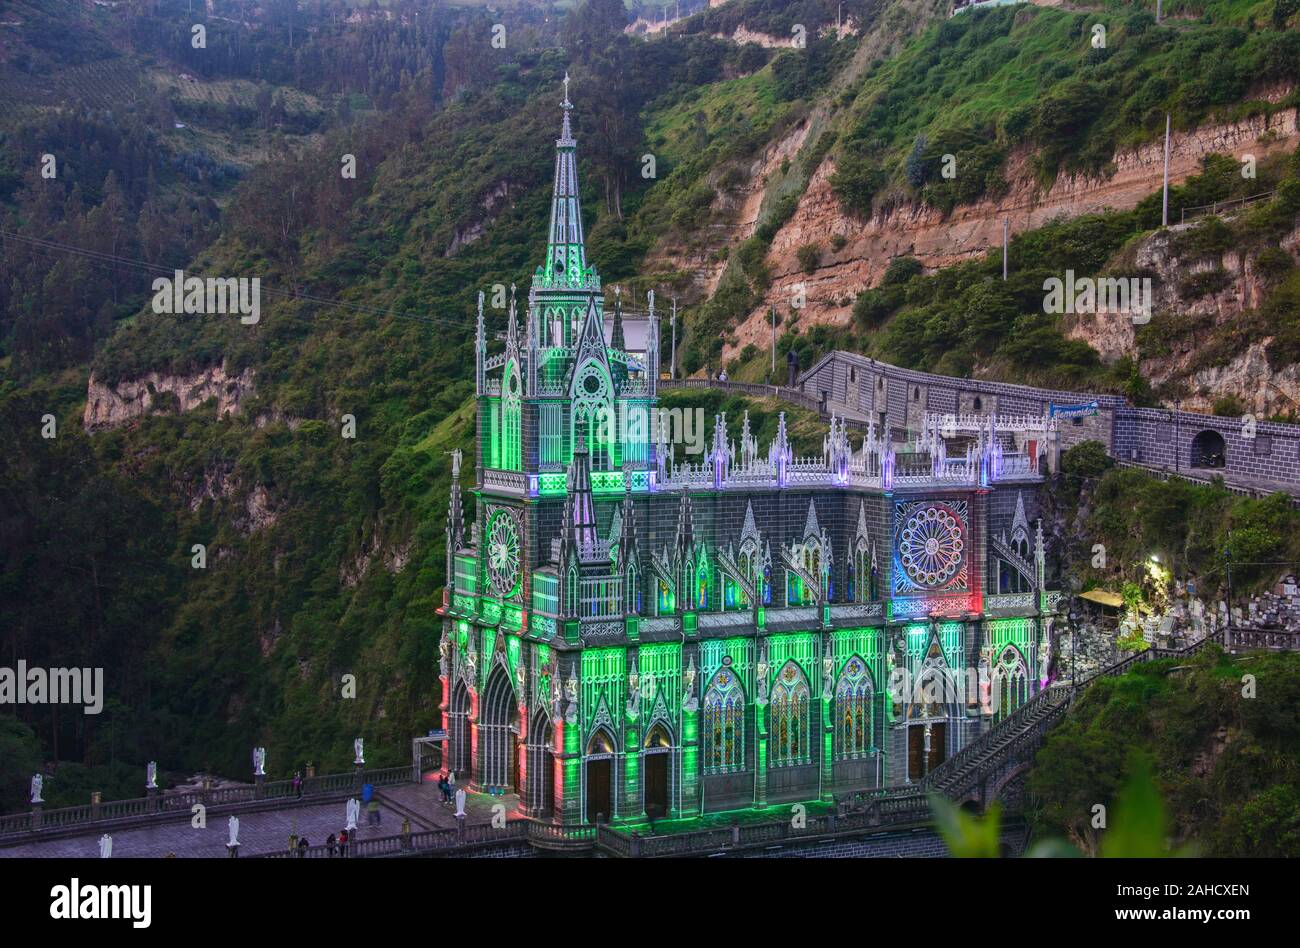 The stunning Las Lajas sanctuary and basilica, Ipiales, Colombia Stock Photo